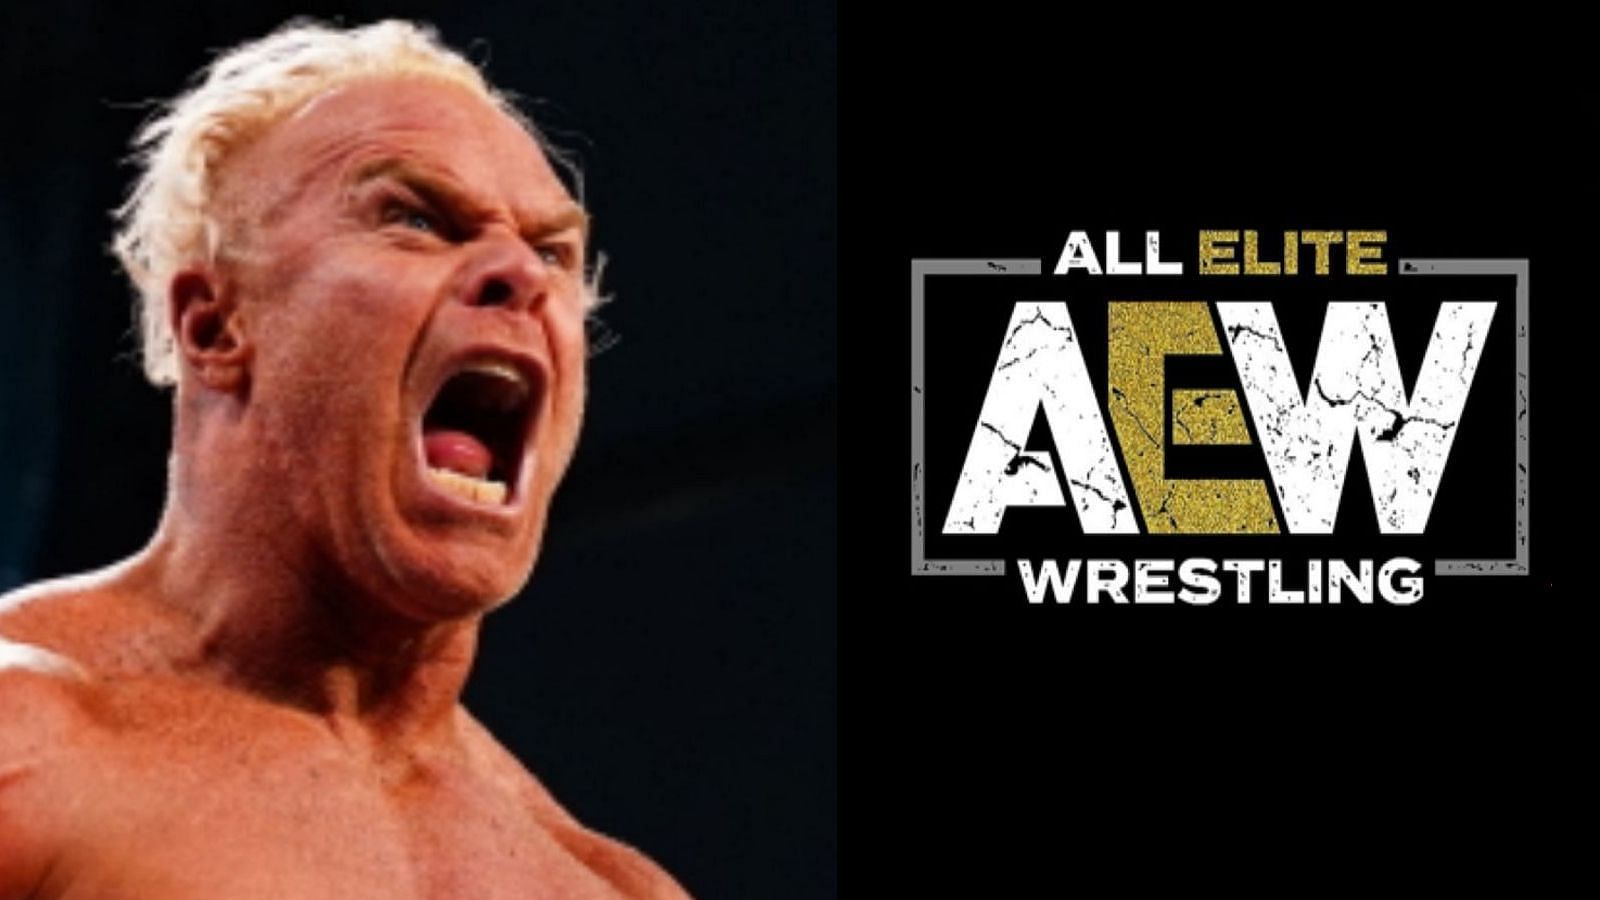 Gunn has been in the best shape of his life in AEW